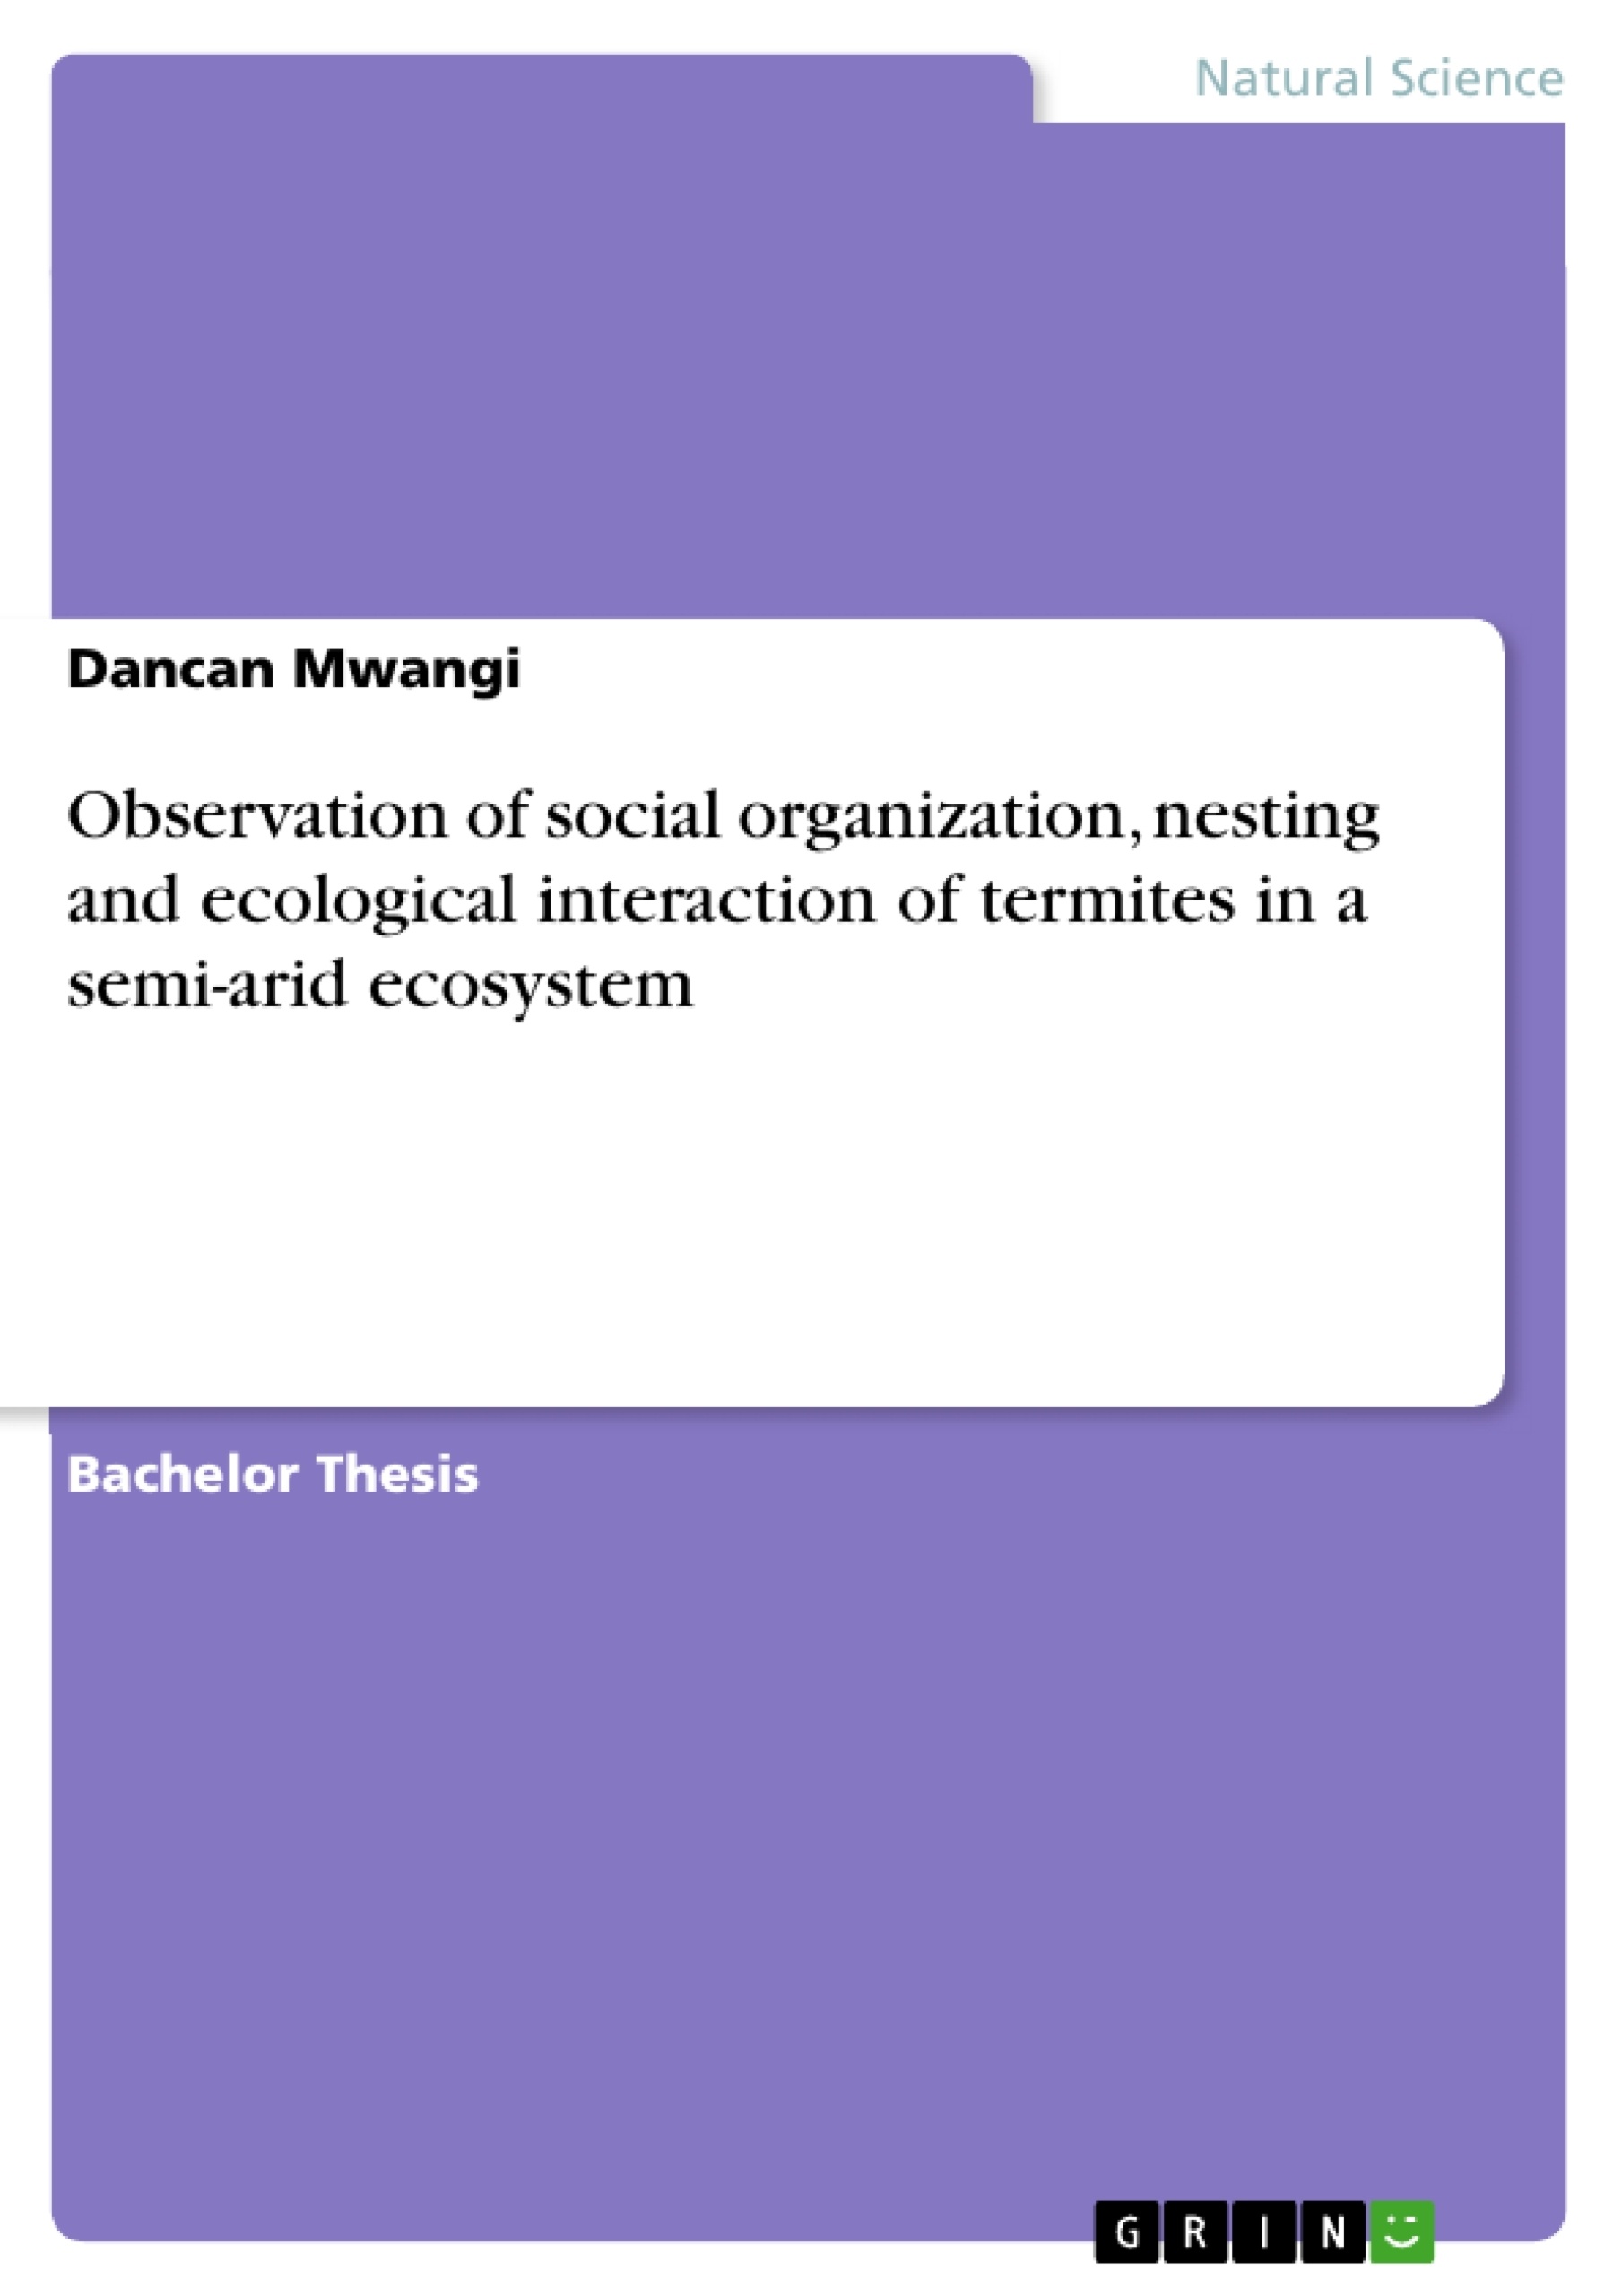 Titre: Observation of social organization, nesting and ecological interaction of termites in a semi-arid ecosystem